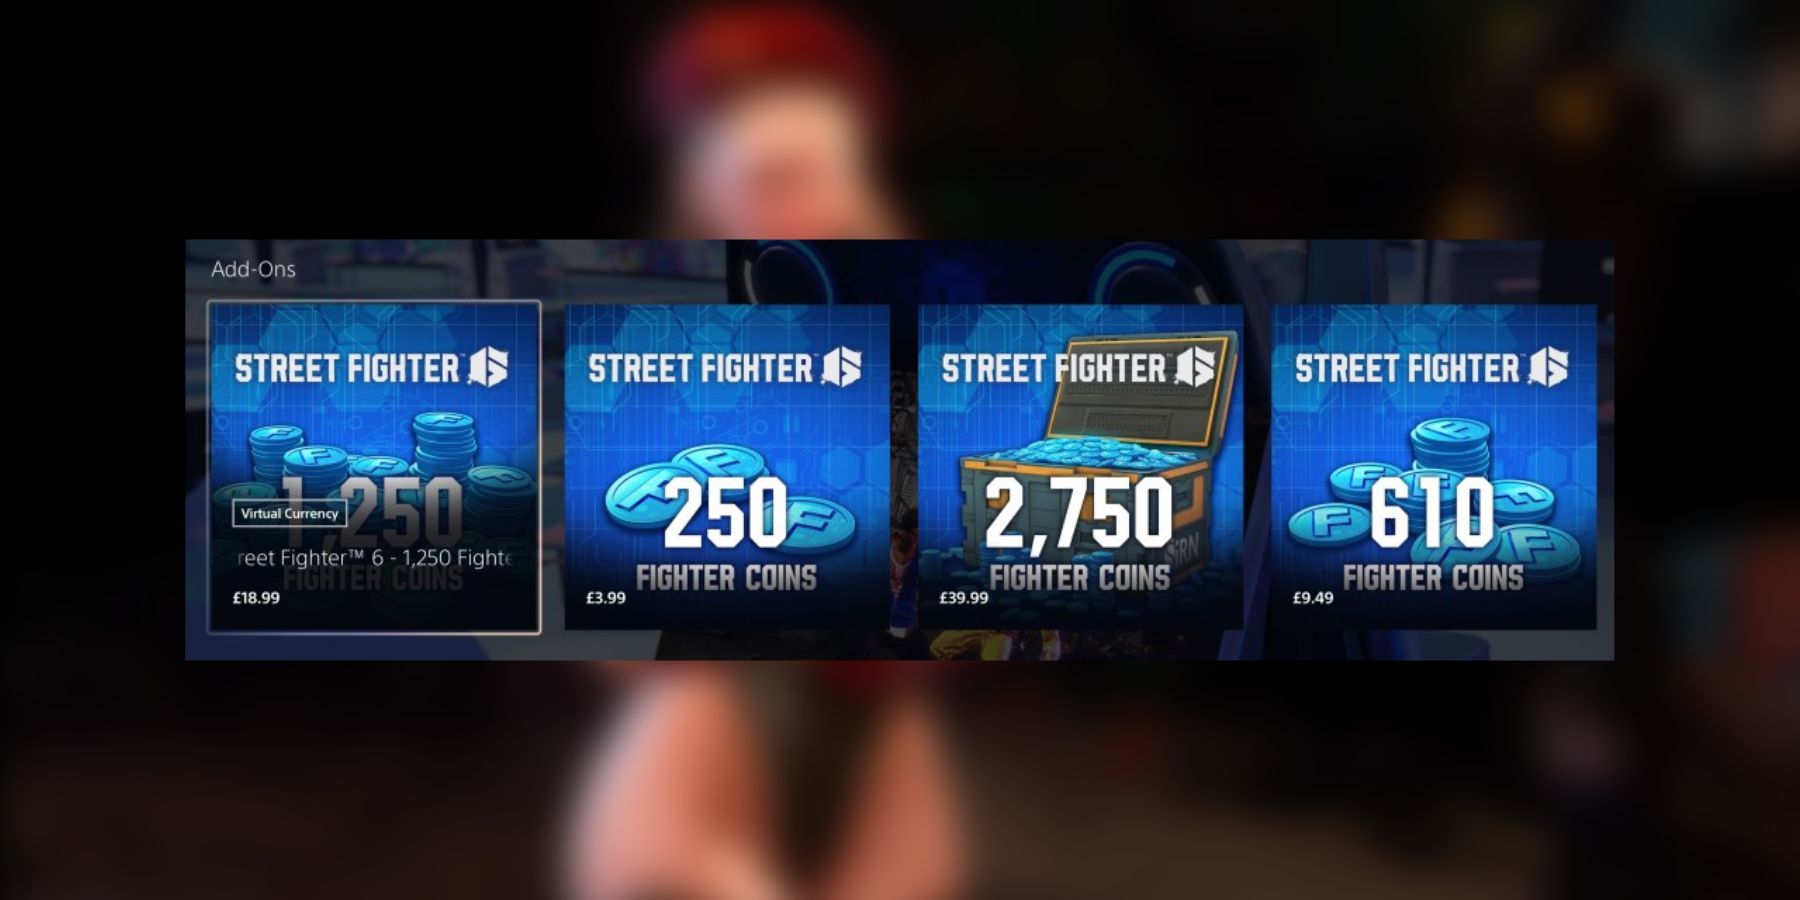 image showing prices for fighter coins in street fighter 6.